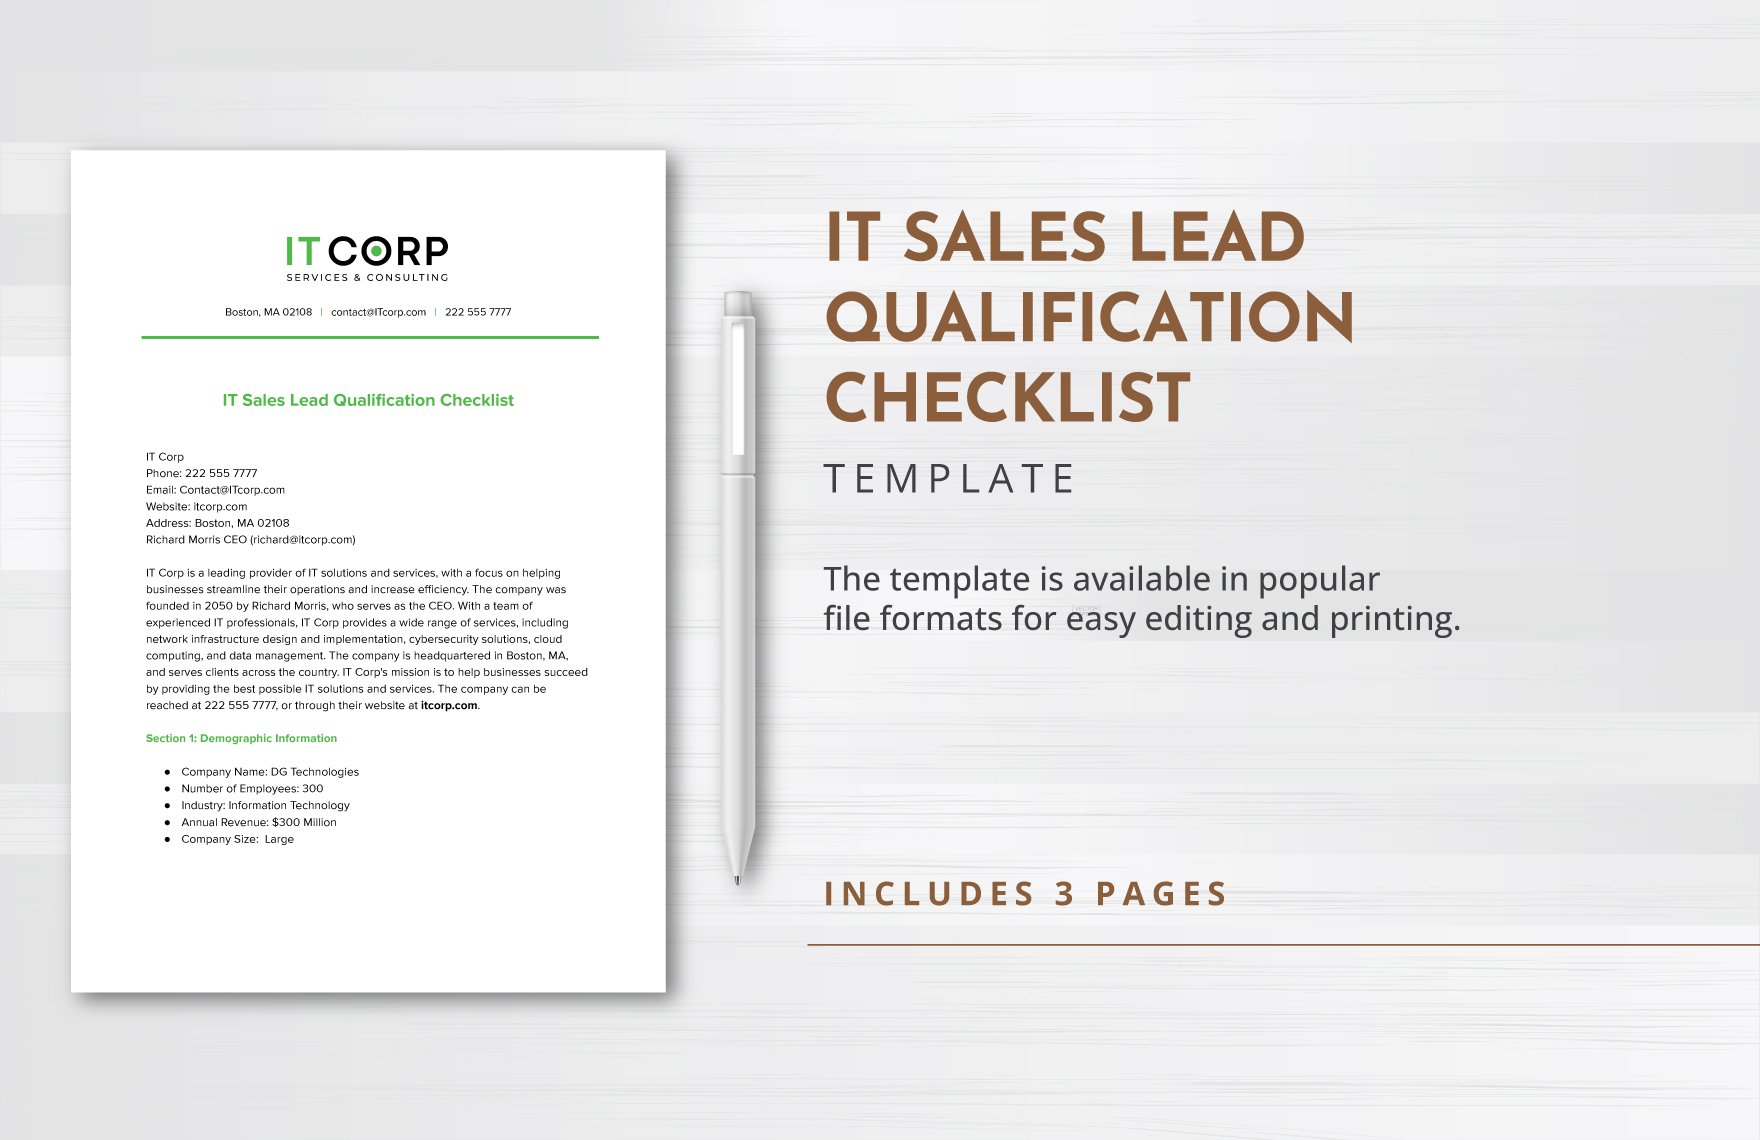 IT Sales Lead Qualification Checklist Template in Word, Google Docs, PDF